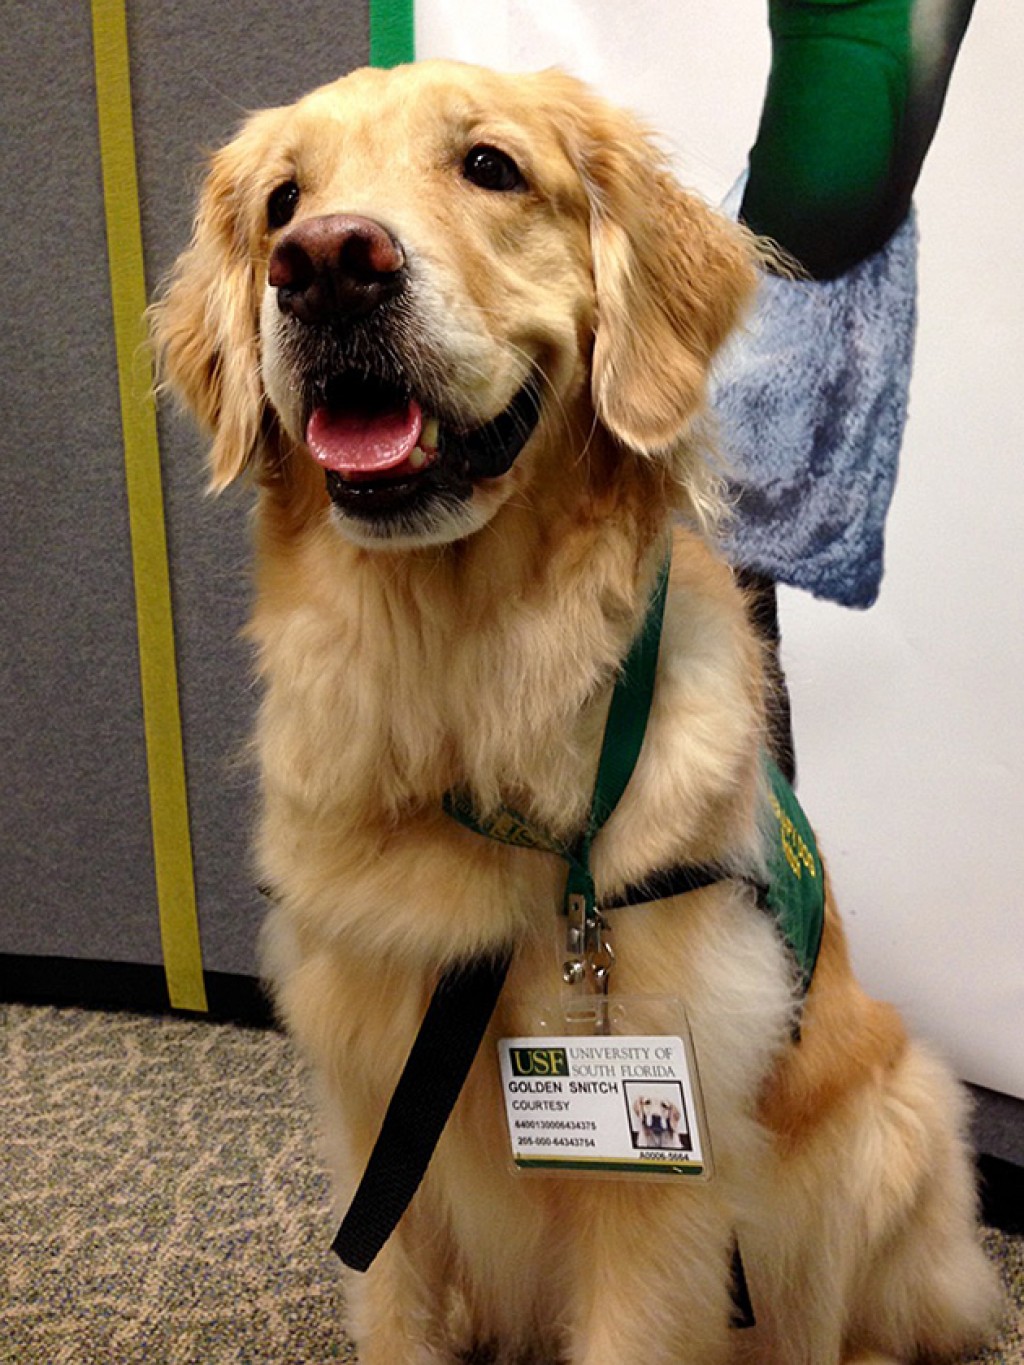 Therapy dog becomes USF’s golden Snitch